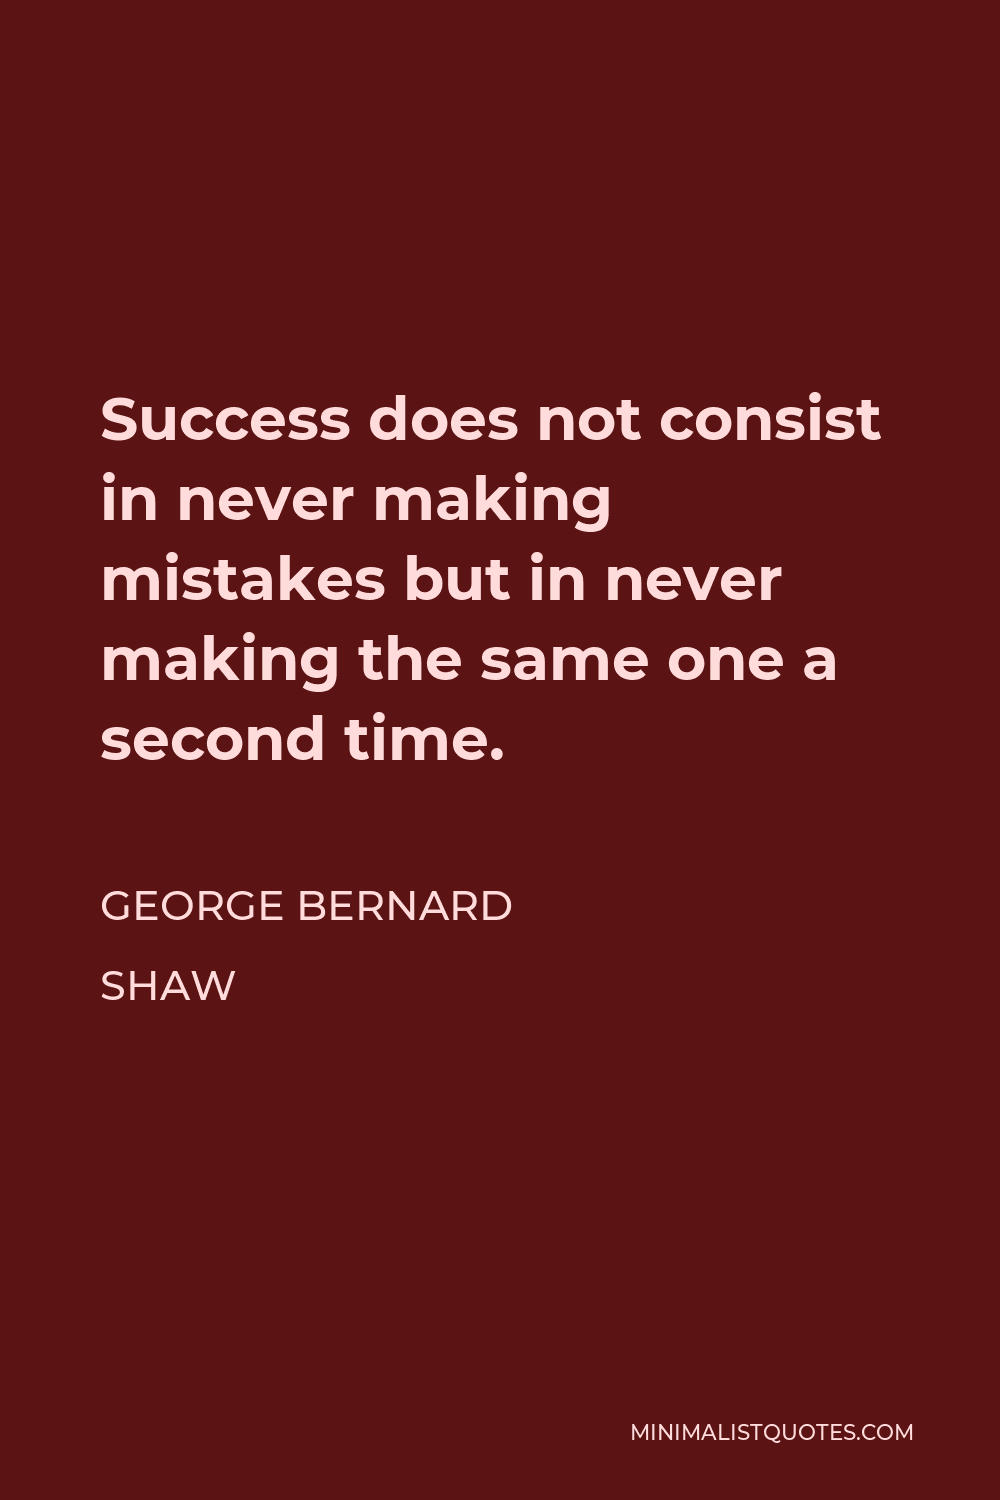 George Bernard Shaw Quote - Success does not consist in never making mistakes but in never making the same one a second time.